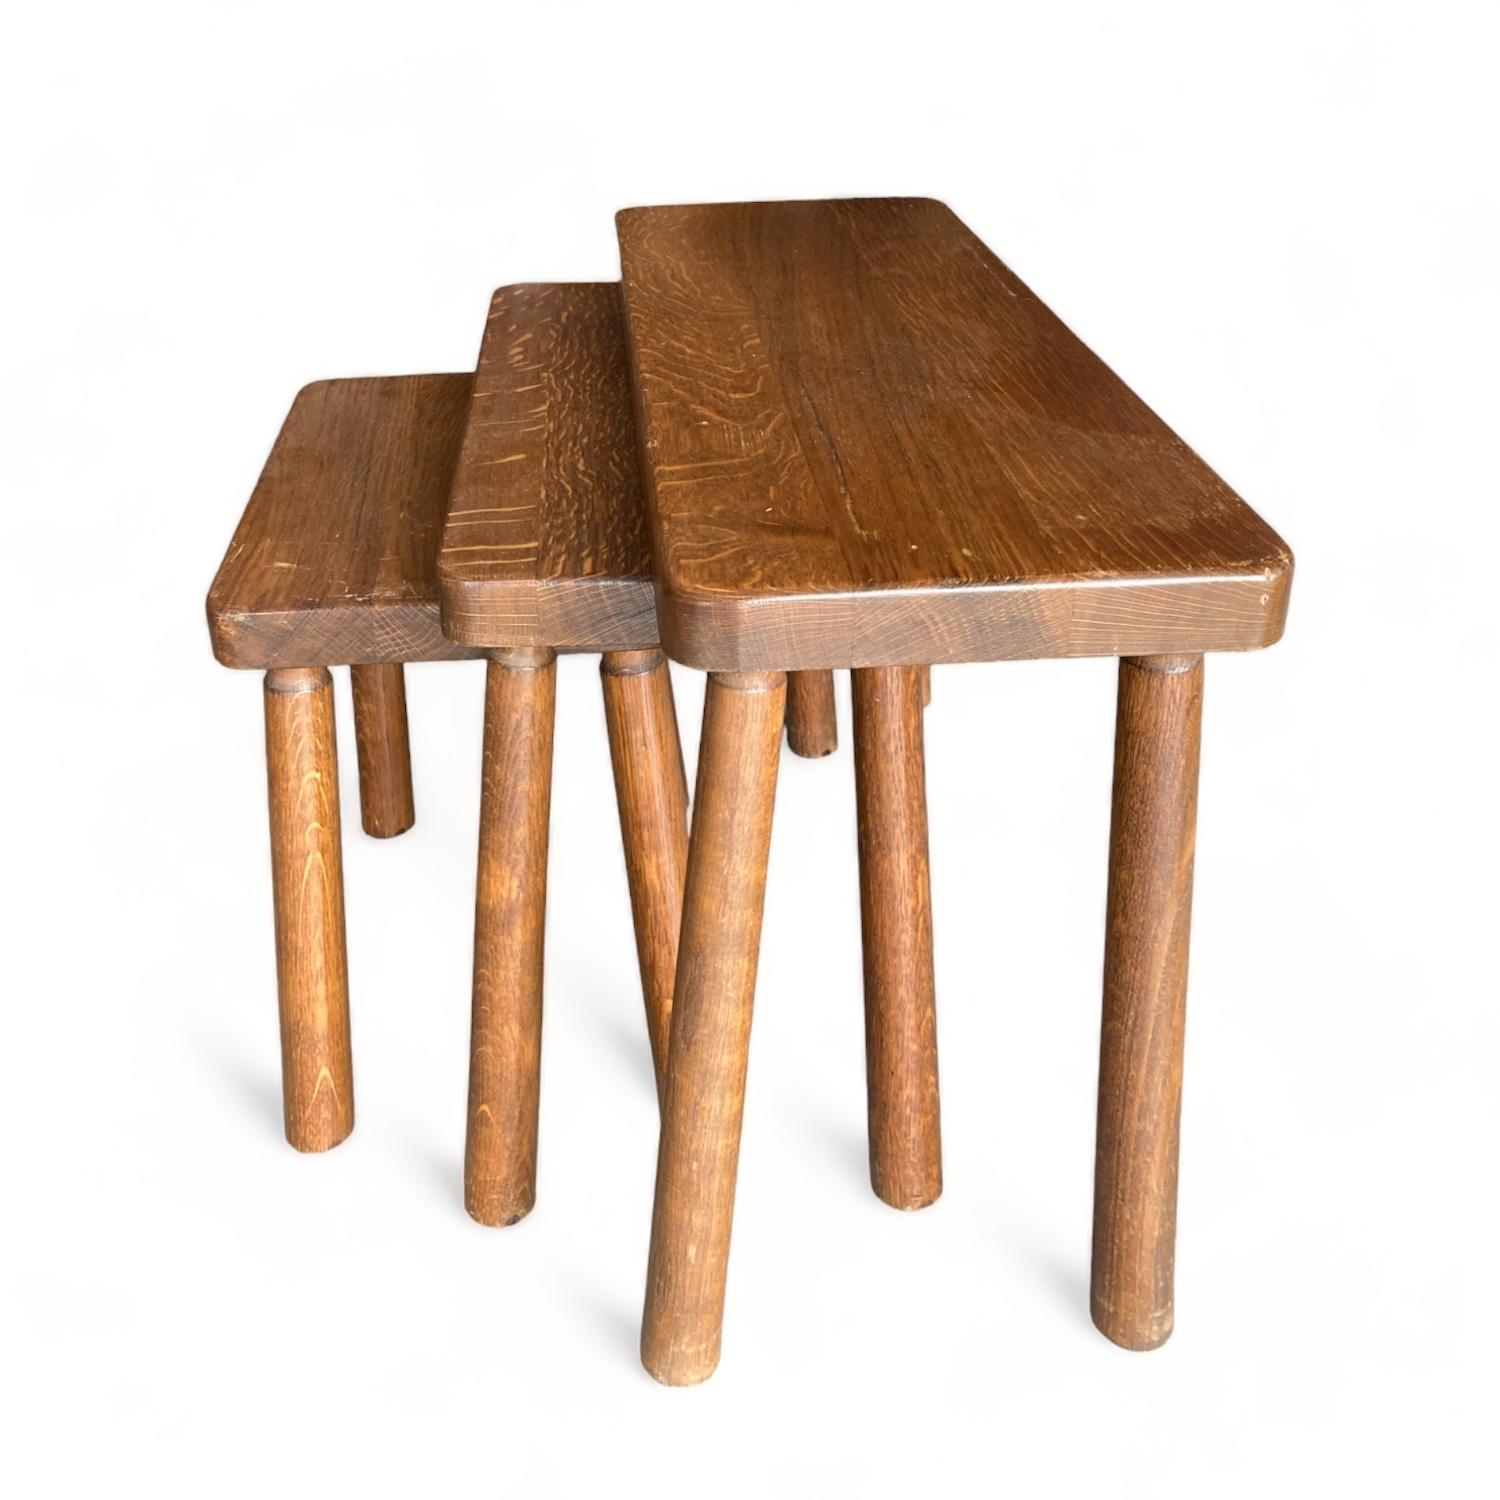 This is a set of 3 exceptionally well-made oak side table. Ideal in a Danish Modern esthetic or mid century modern. These nesting tables would be great as end tables as well as console/lamp table.